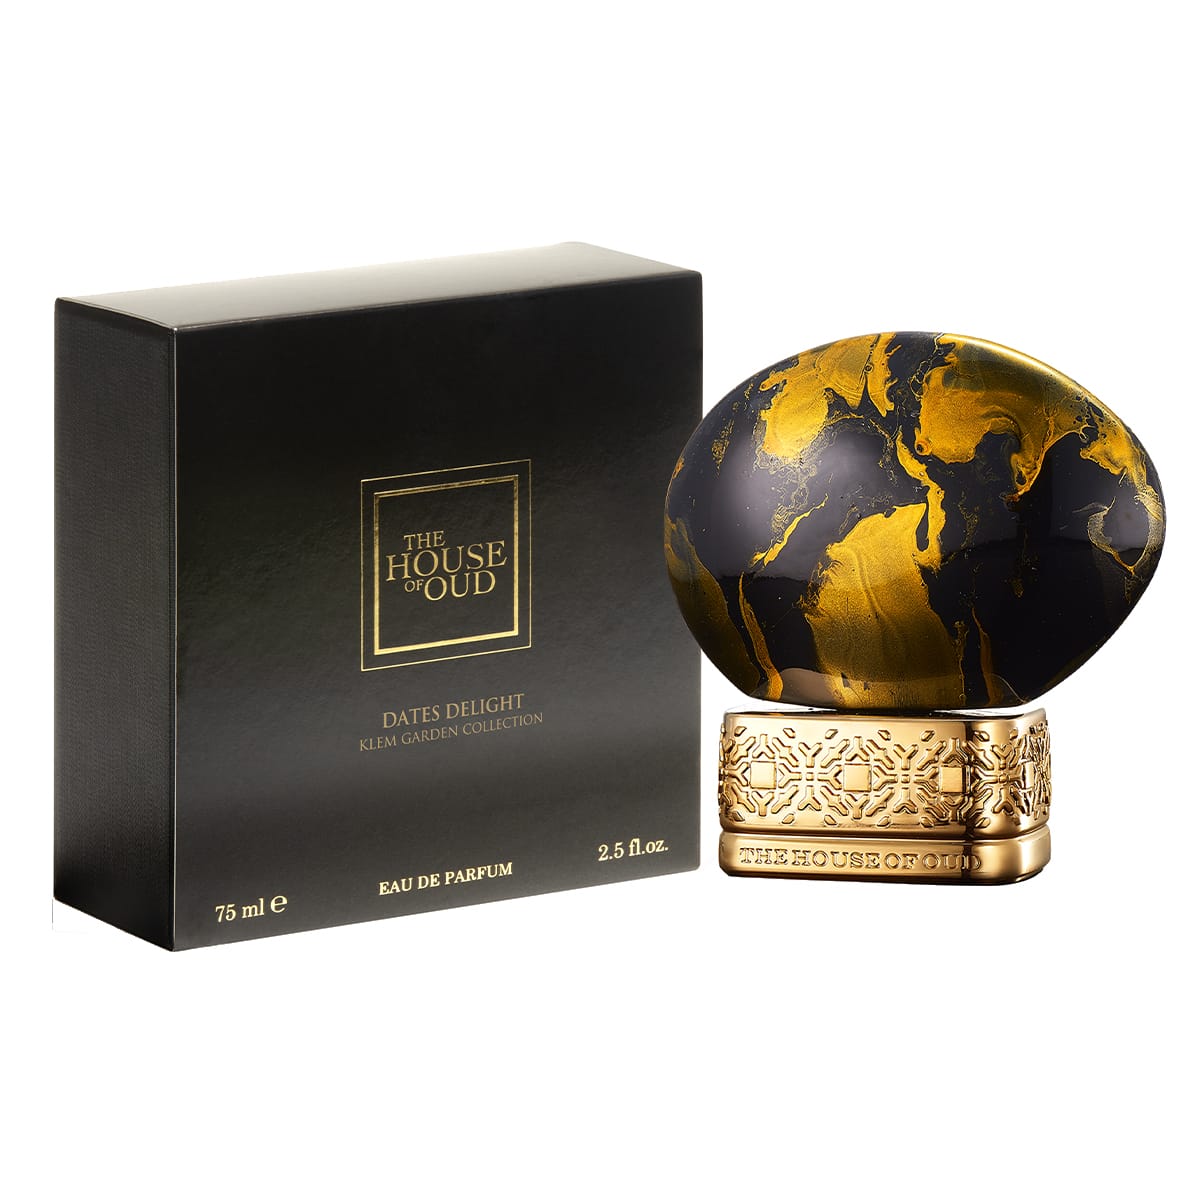 Dates Delight – The House of Oud – EDP 75 ml